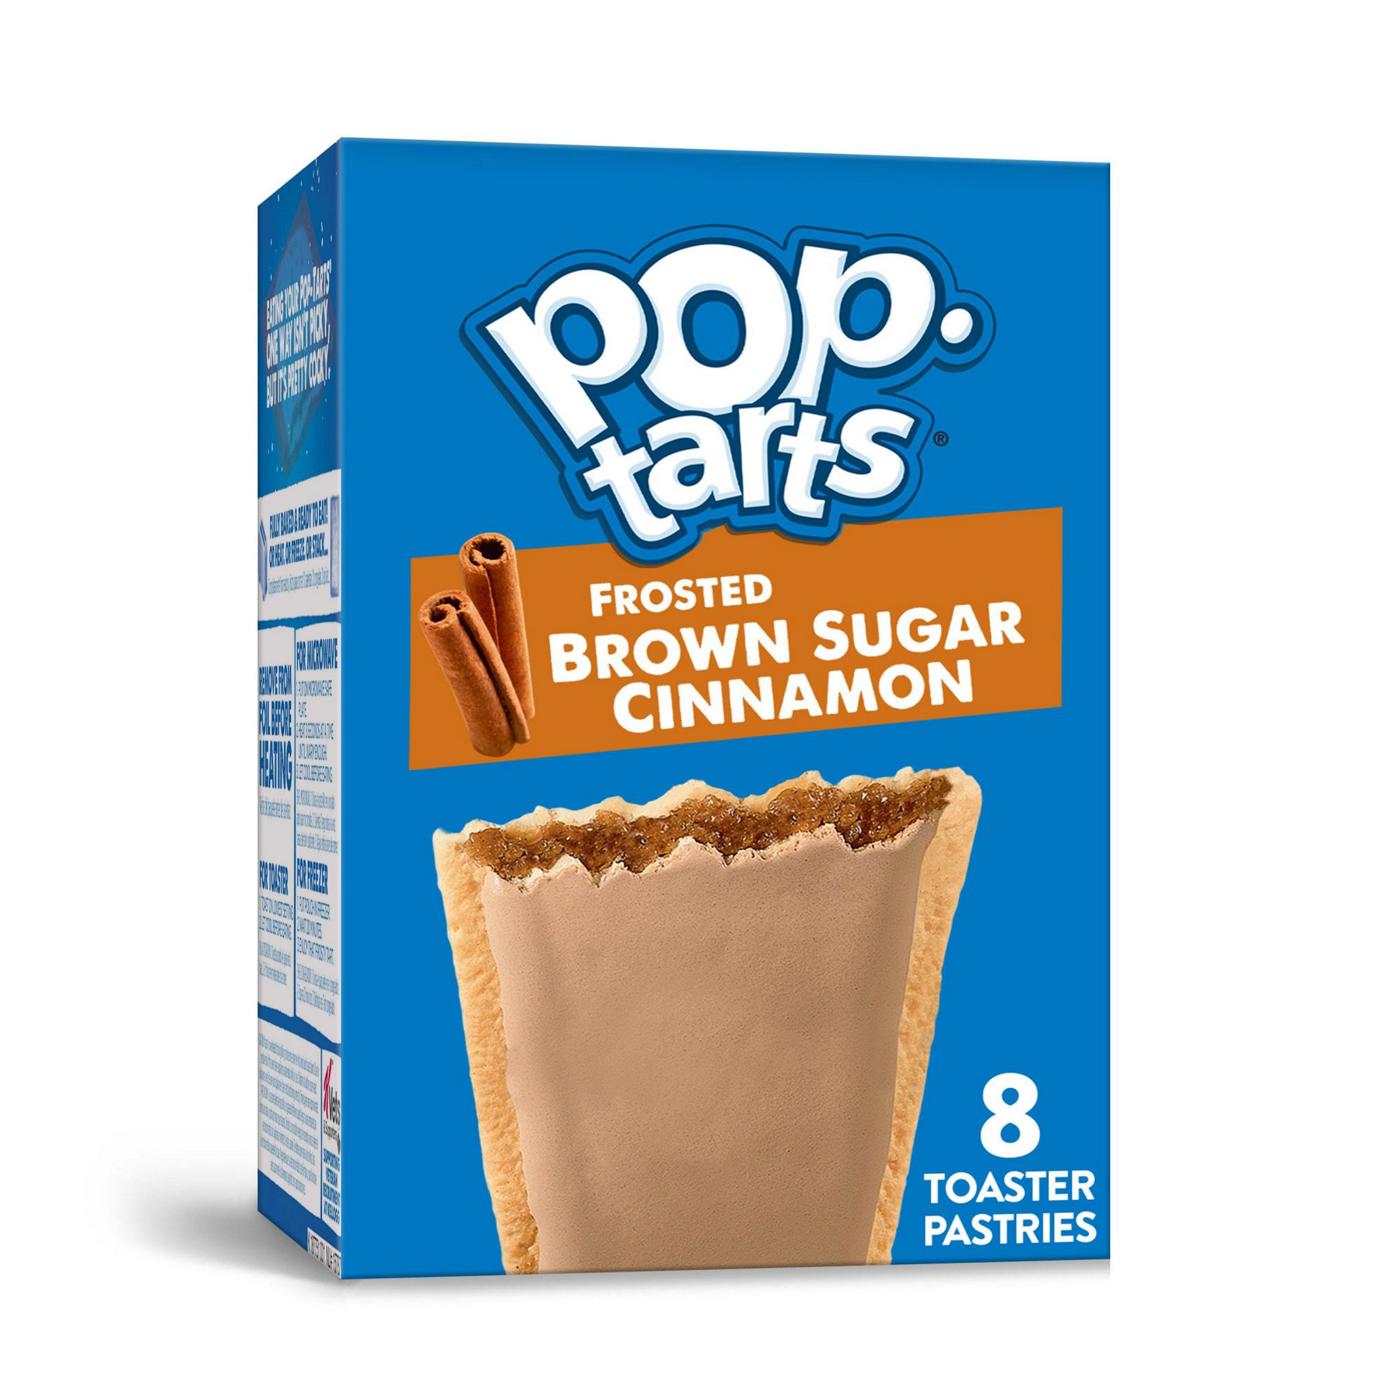 Pop-Tarts Frosted Brown Sugar Cinnamon Toaster Pastries; image 5 of 6